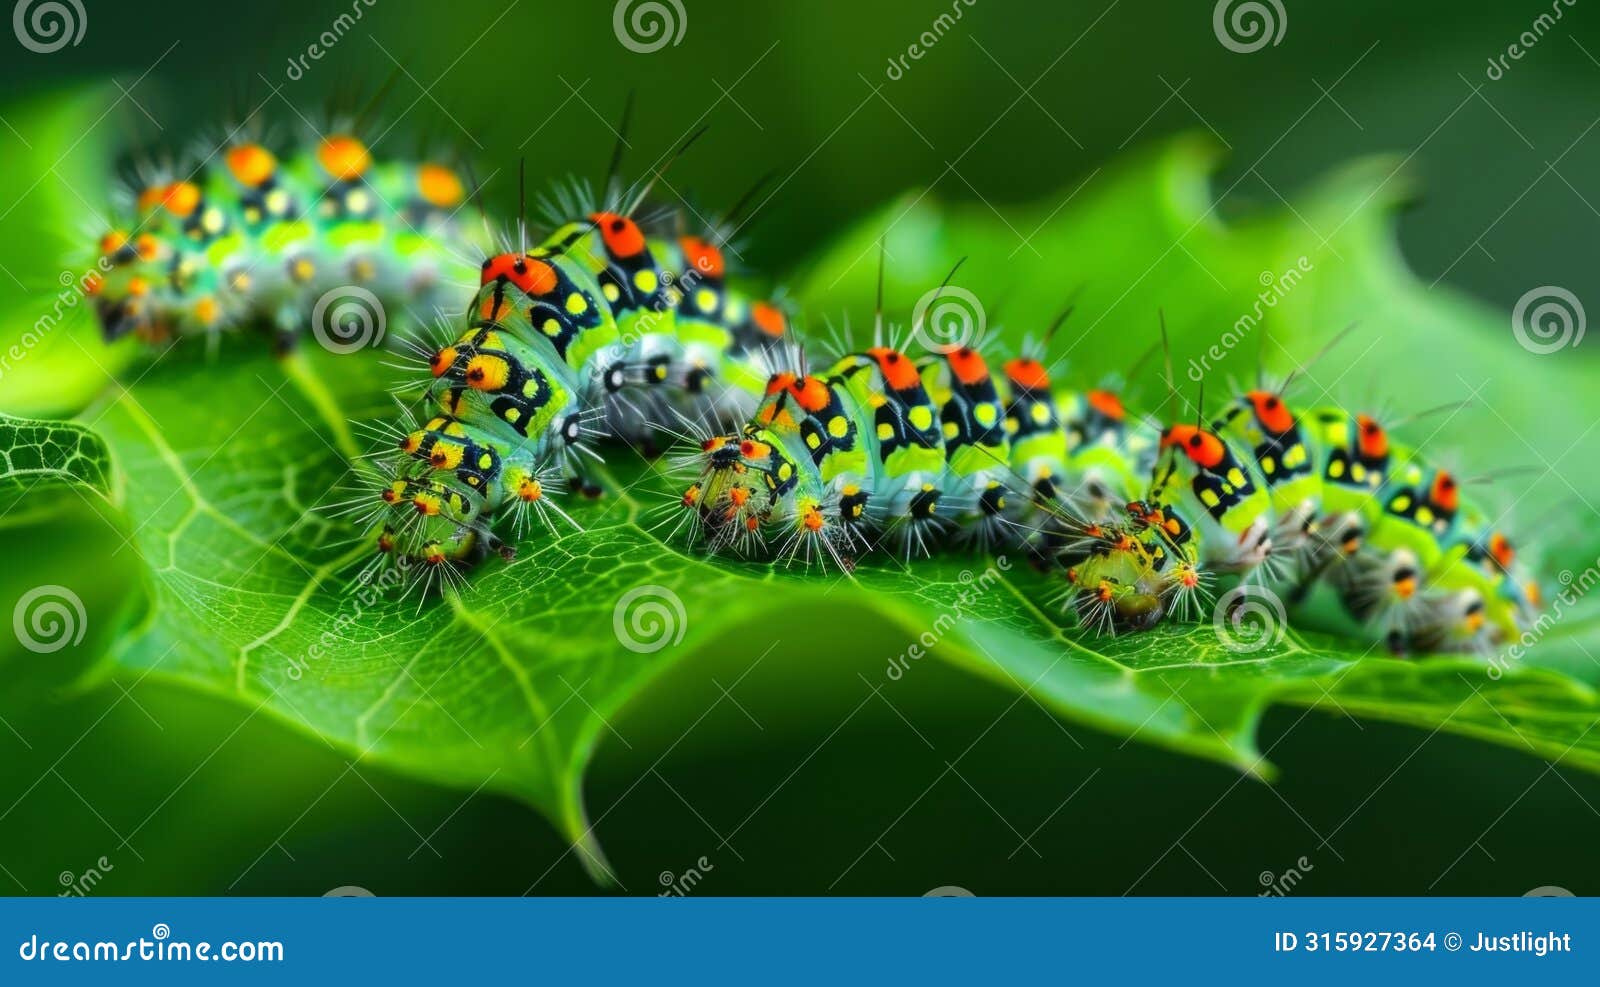 a vibrant photo of a group of caterpillars each with distinct markings and coloration crawling a a bed of lush green